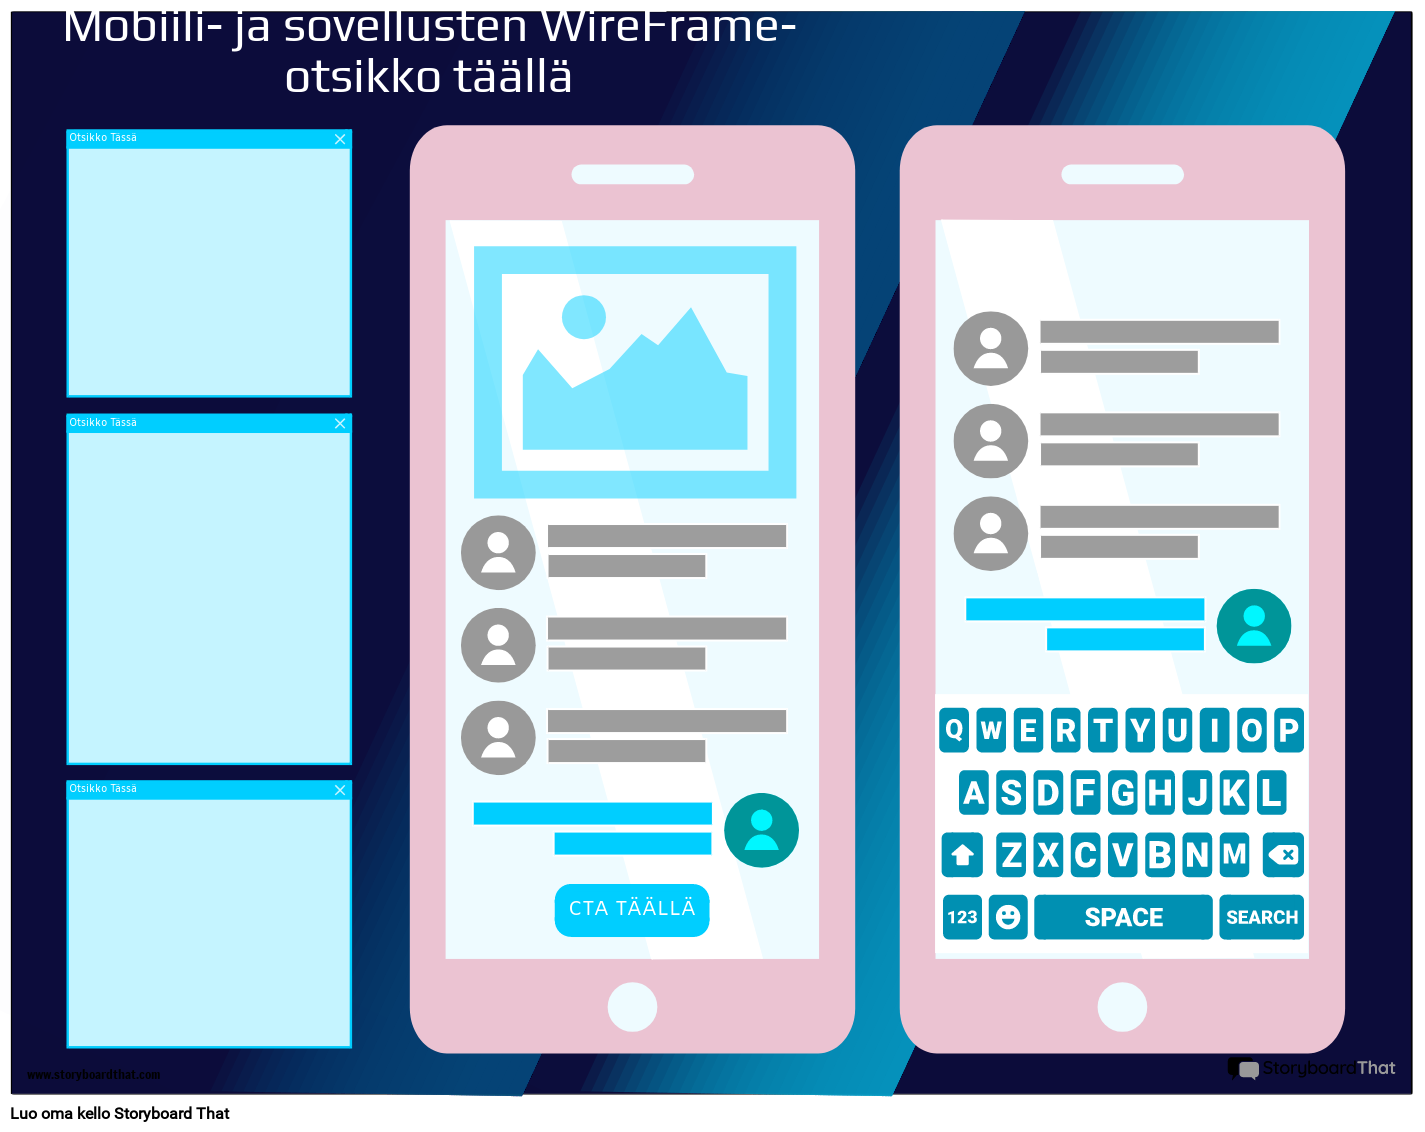 Corporate Mobile WireFrame Template 2